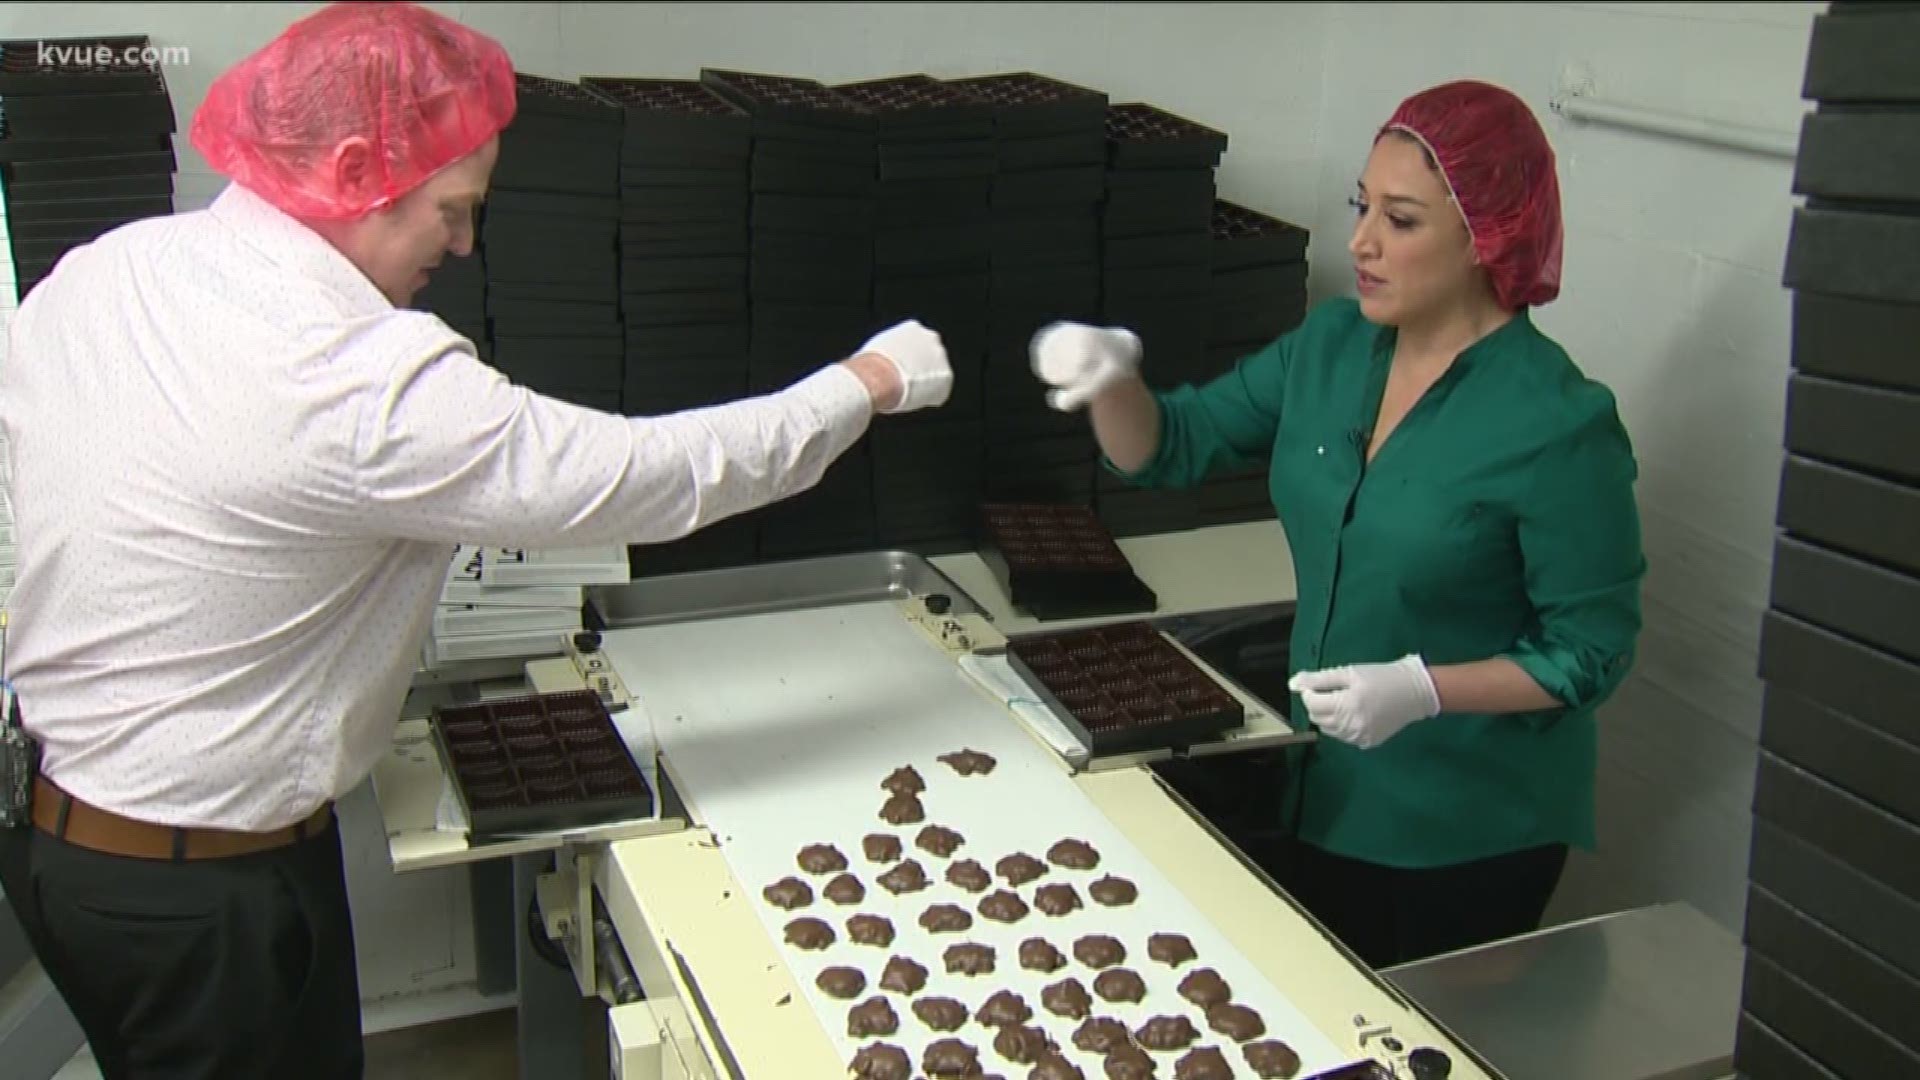 At Lammes Candies employees are slammed trying to fill countless orders for Valentine's Day. 
It's one of the busiest times of the year, so KVUE's Bryan and Yvonne went to help.